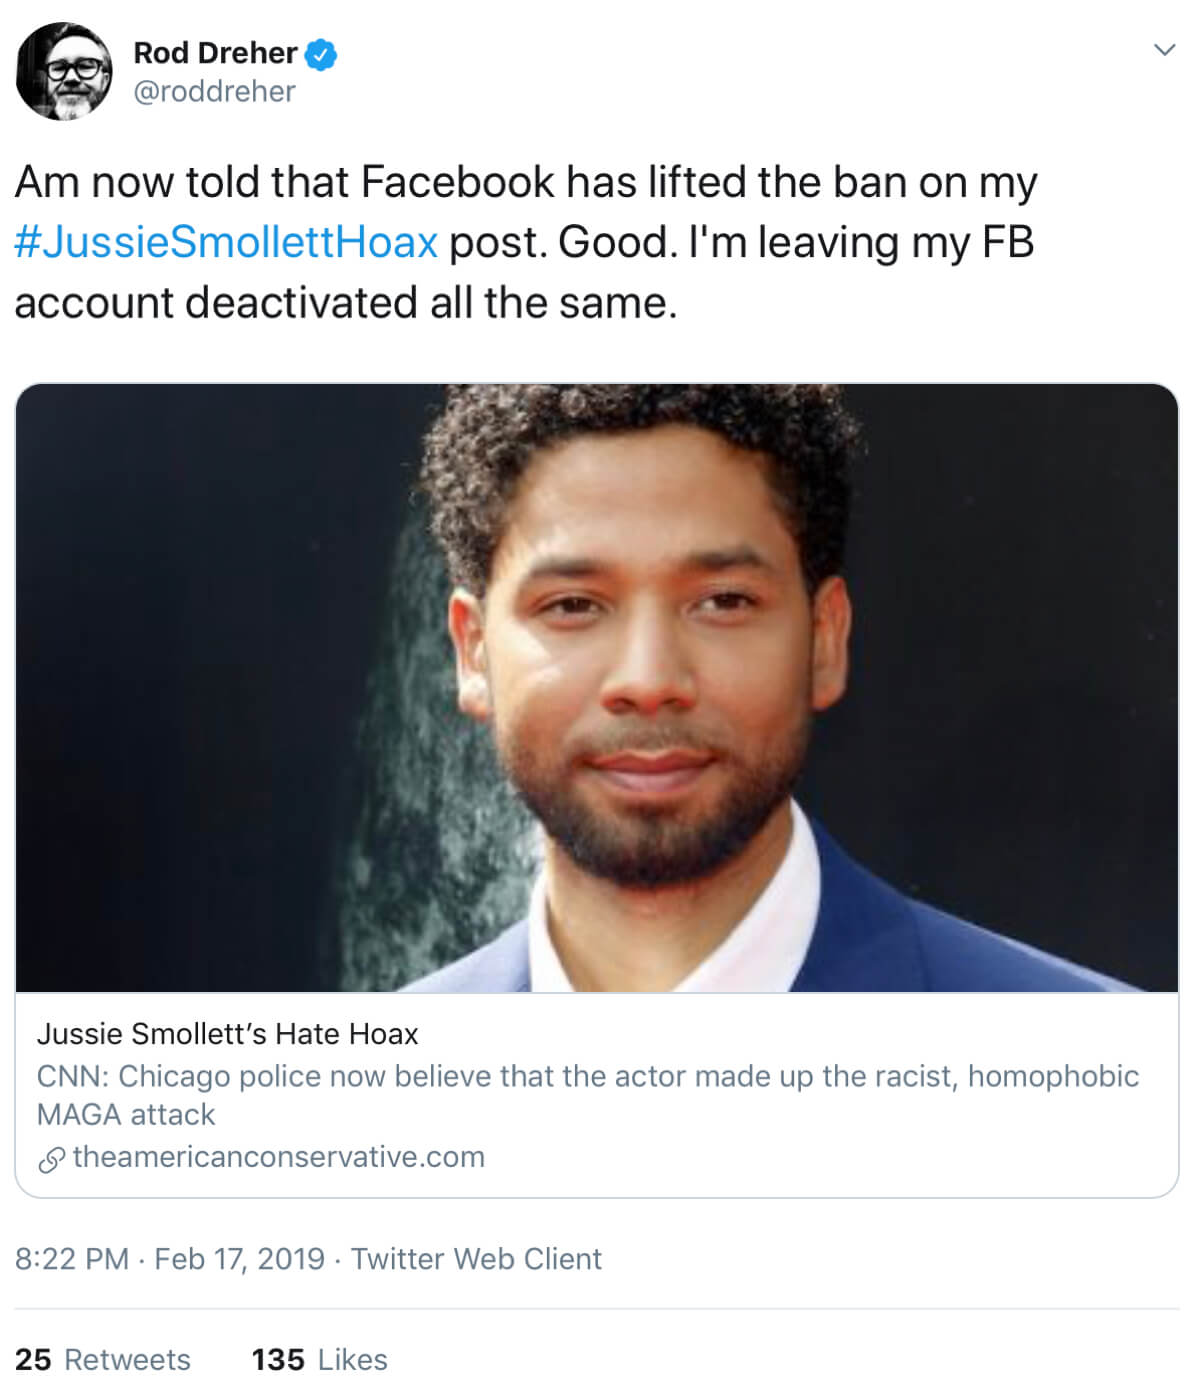 Rod Dreher’s tweet about the Facebook ban on his Jussie Smollet article being lifted.